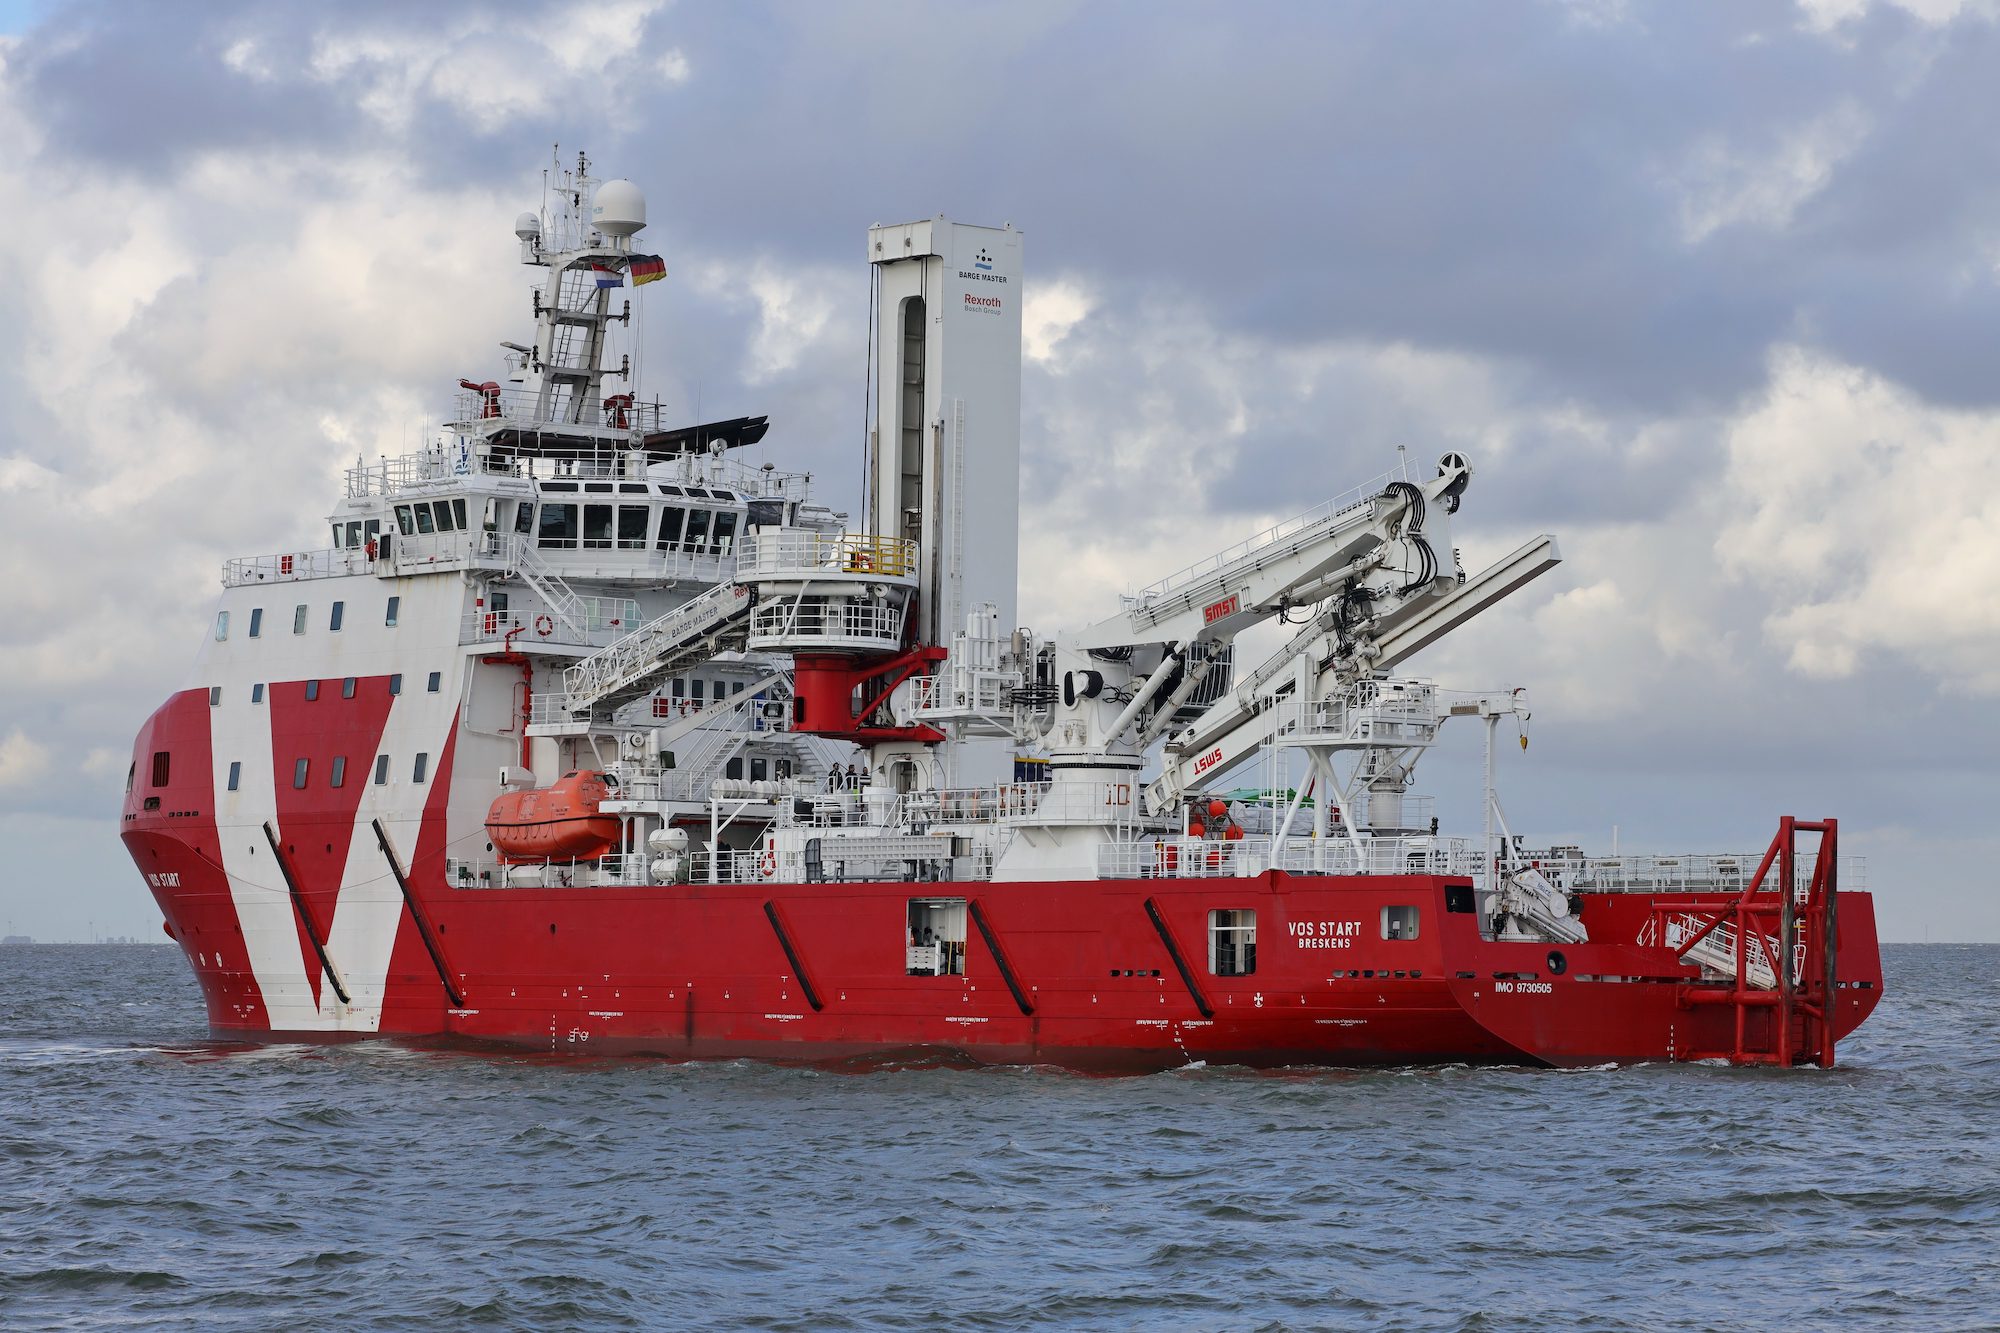 The offshore supply ship VOS Start reaches the port of Cuxhaven on June 20, 2022.